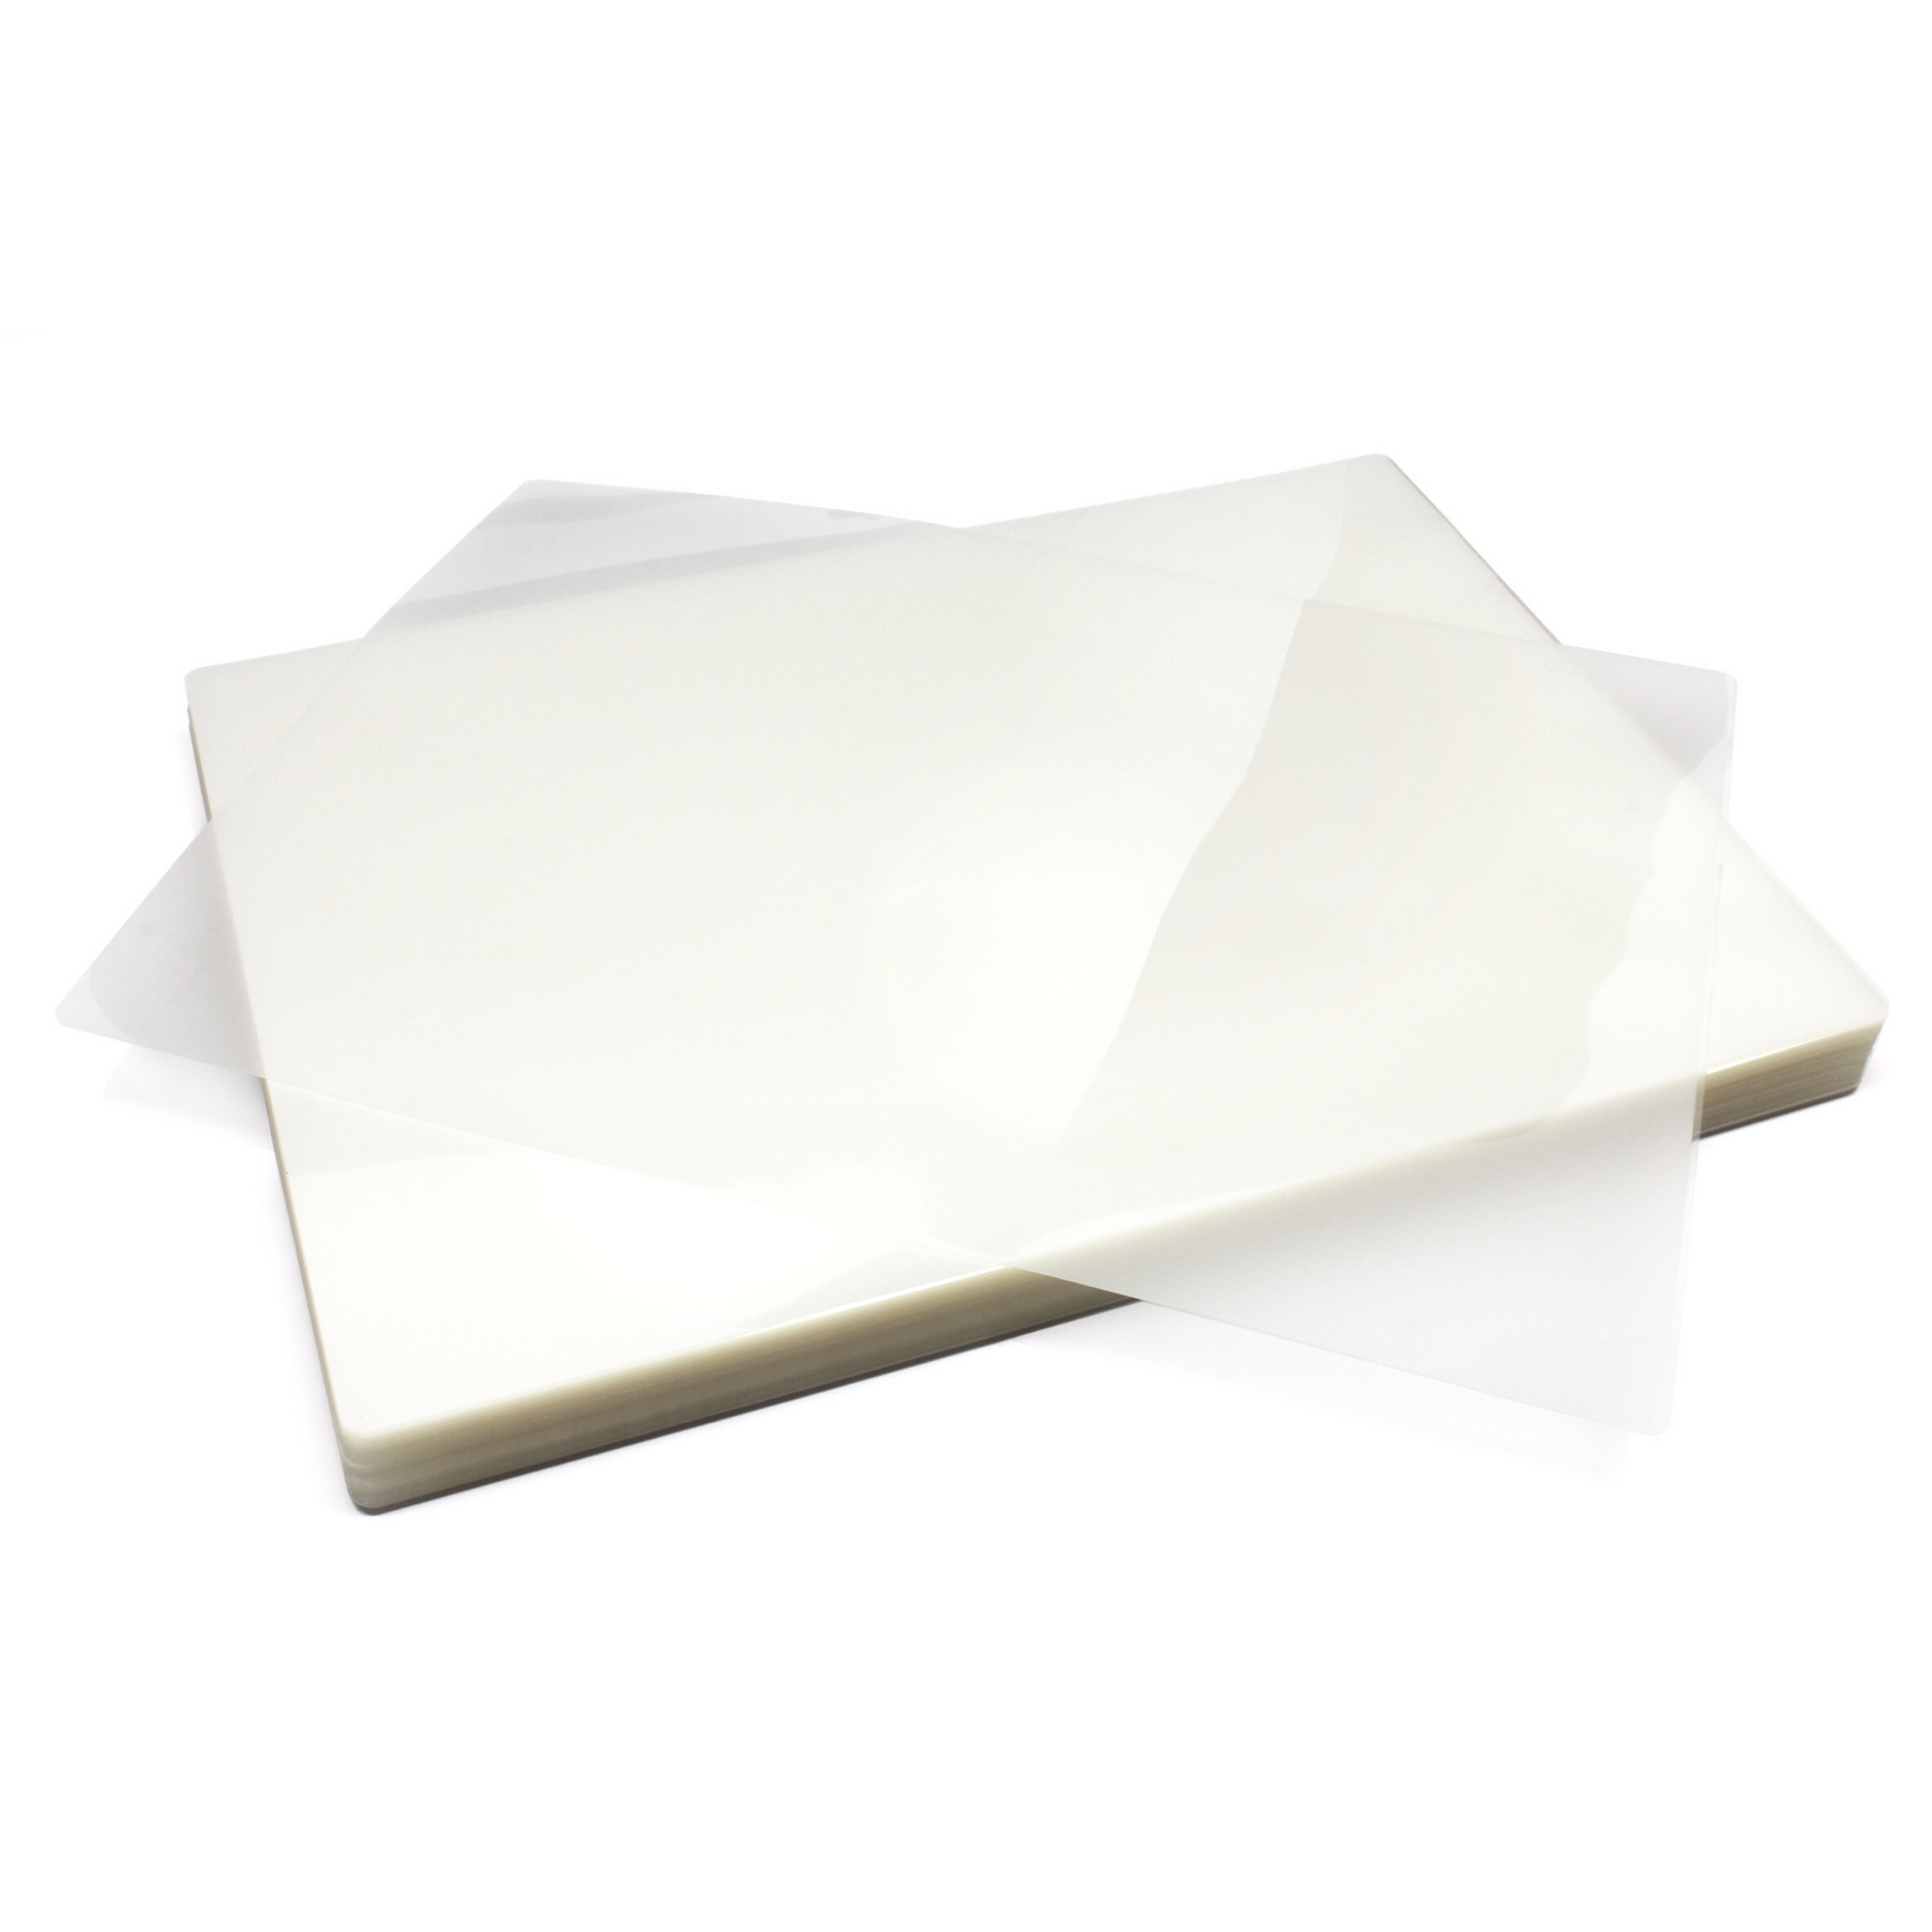 Several A4 gloss laminating pouches with a 150 micron thickness, fanned out on a white surface, highlighting the sheen and transparency of the material.